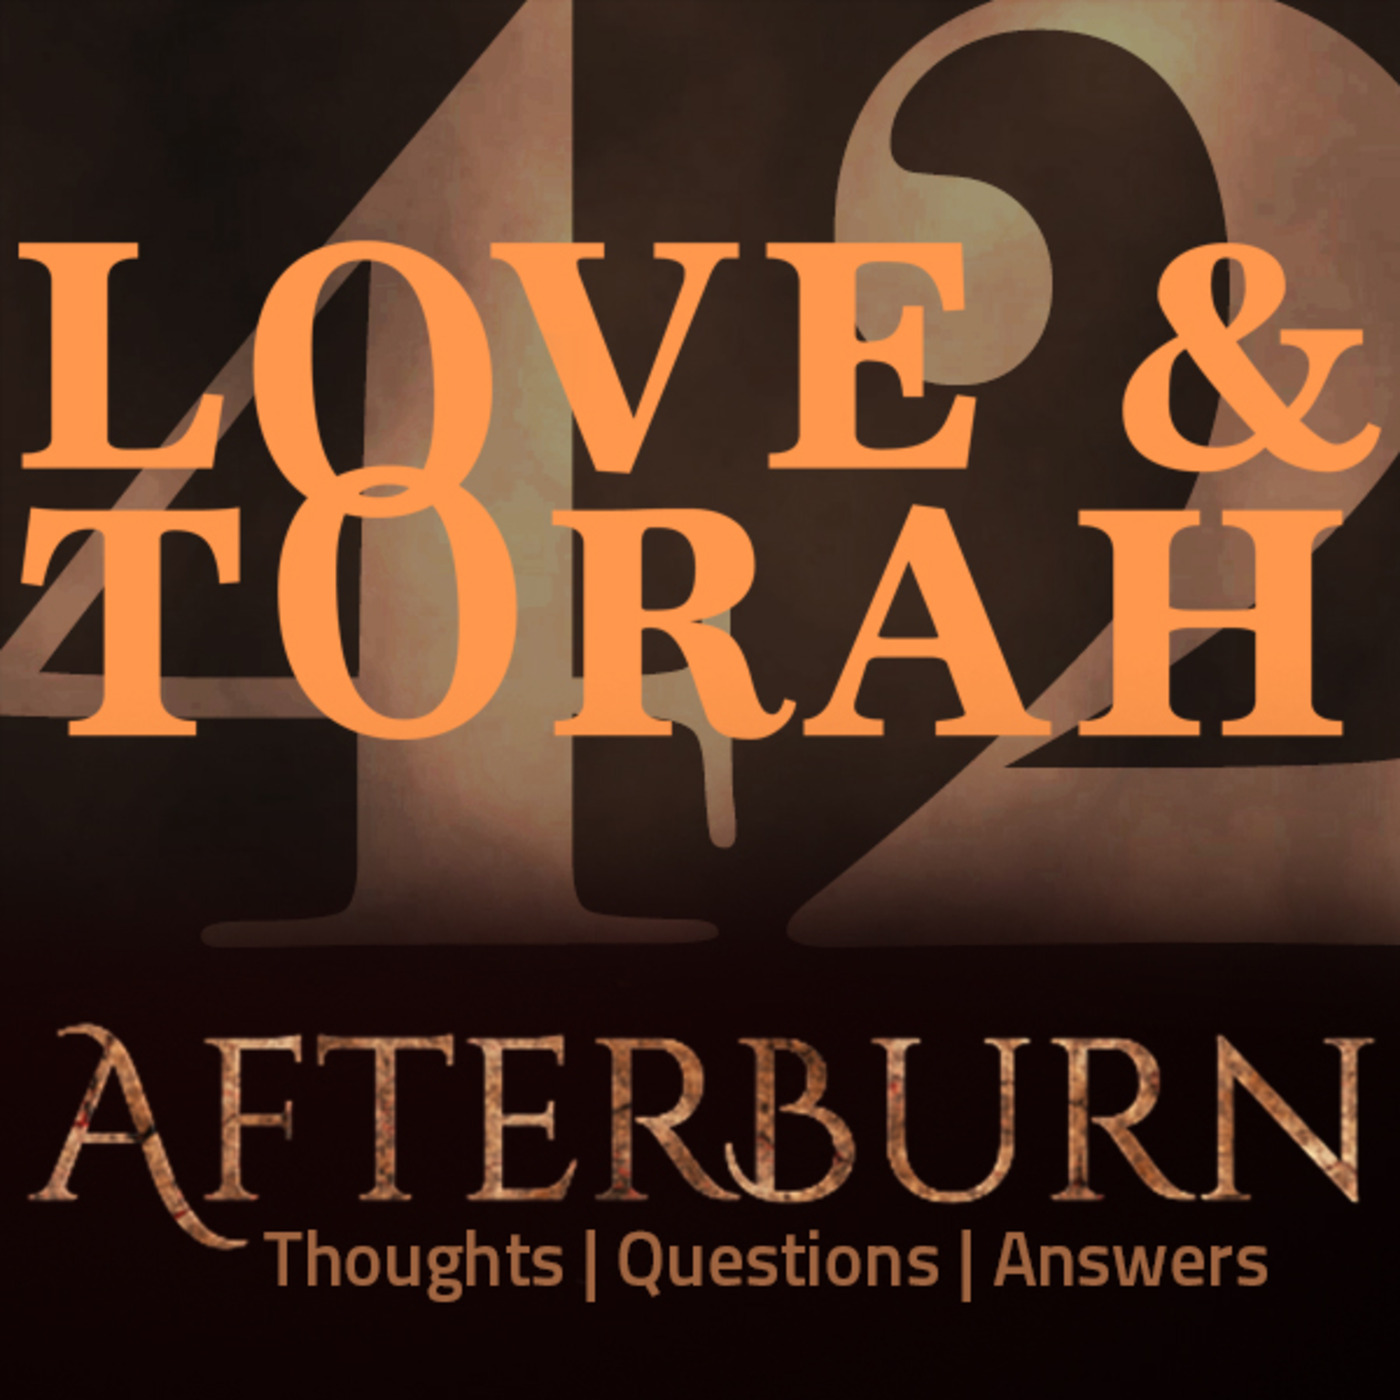 Episode 647: Afterburn | Thoughts, Q&A on Love and Torah | Part 42